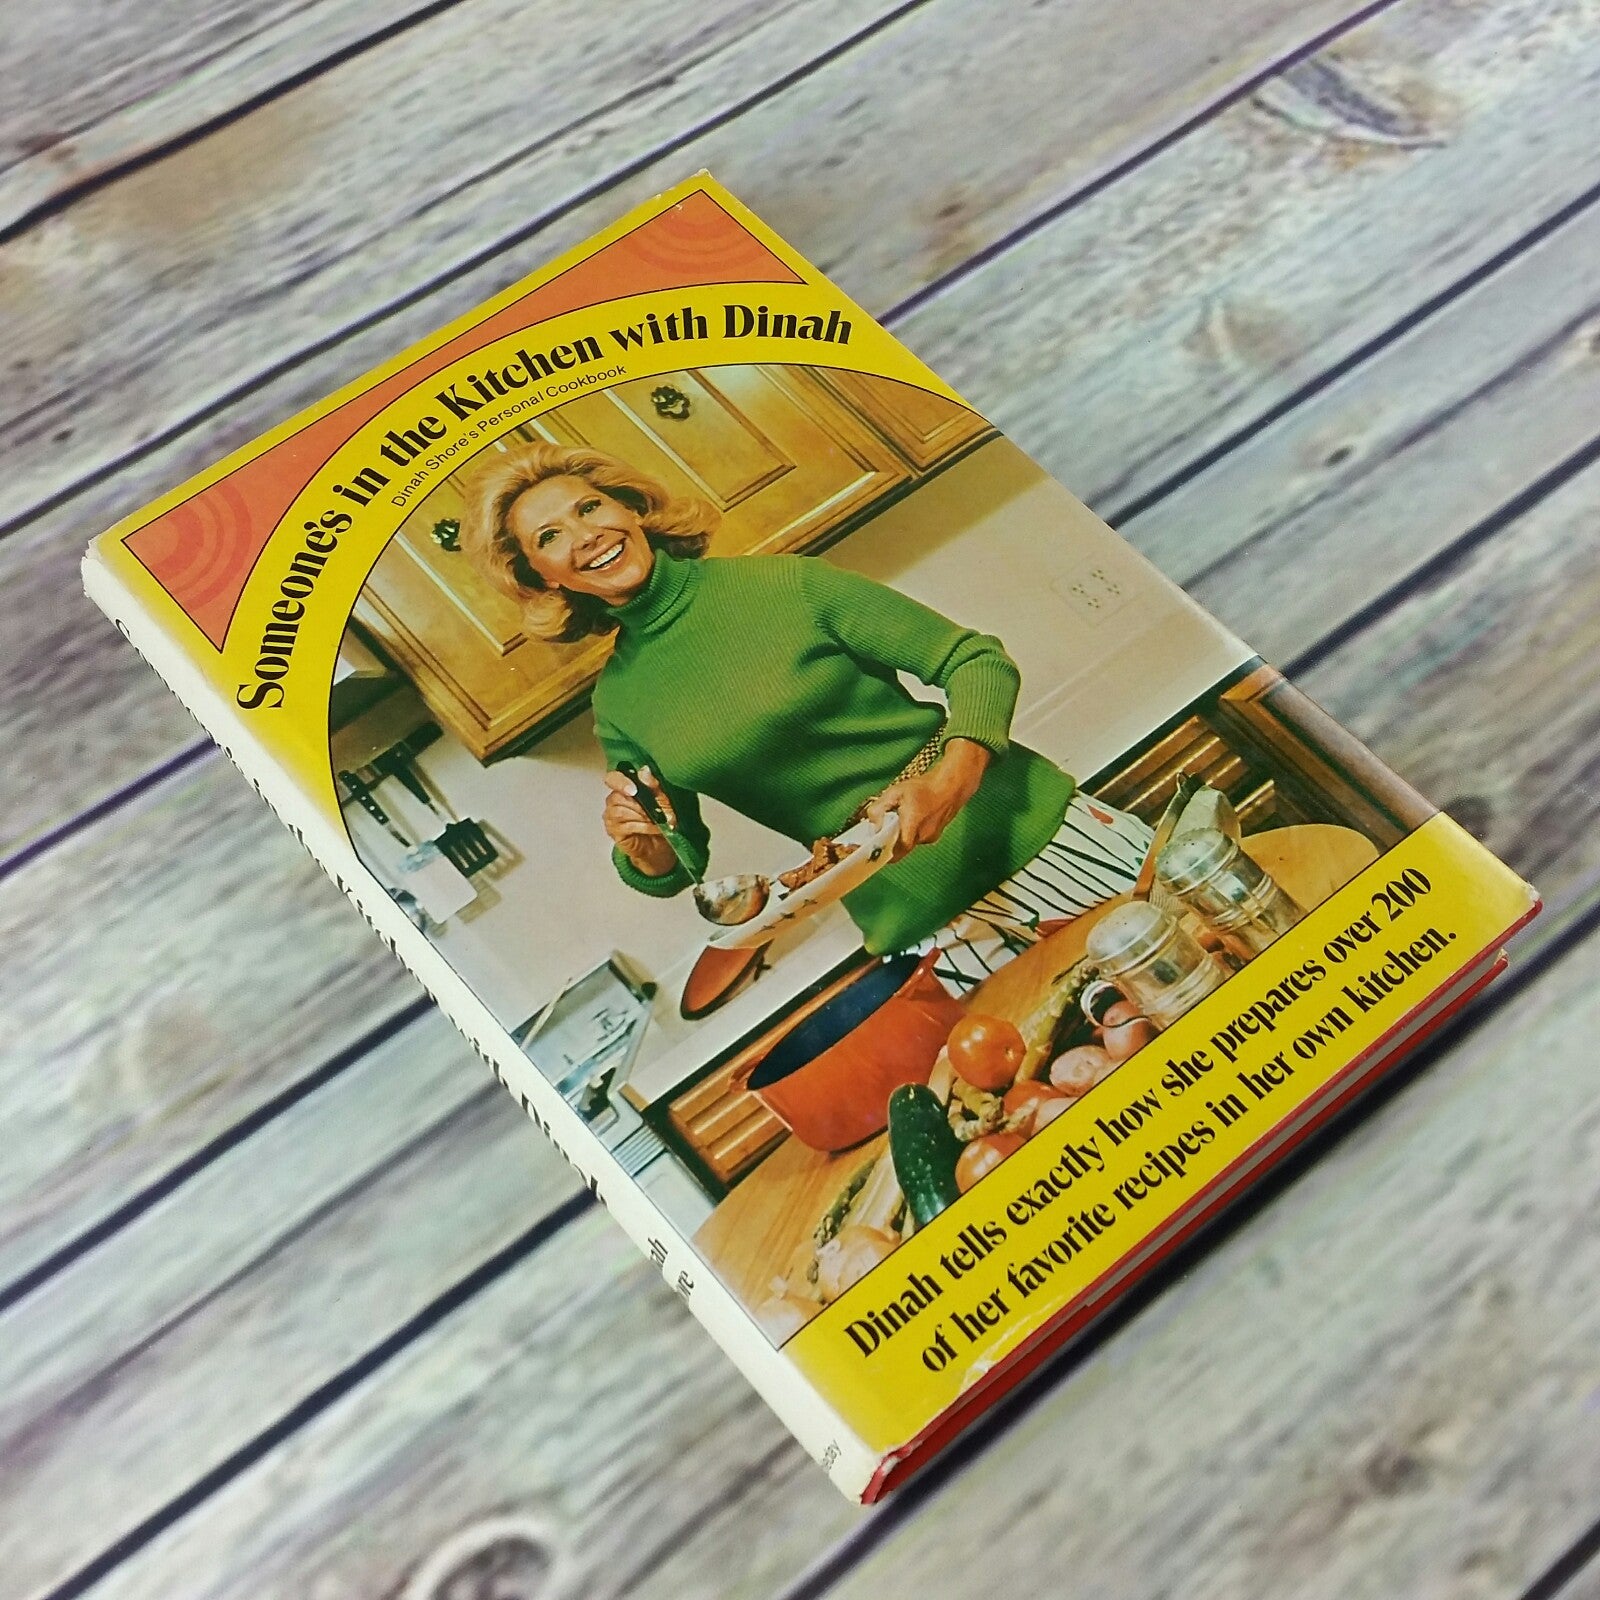 Vintage Cookbook Someones In the Kitchen with Dinah 200 Recipes 1971 Hardcover with Dust Jacket - At Grandma's Table